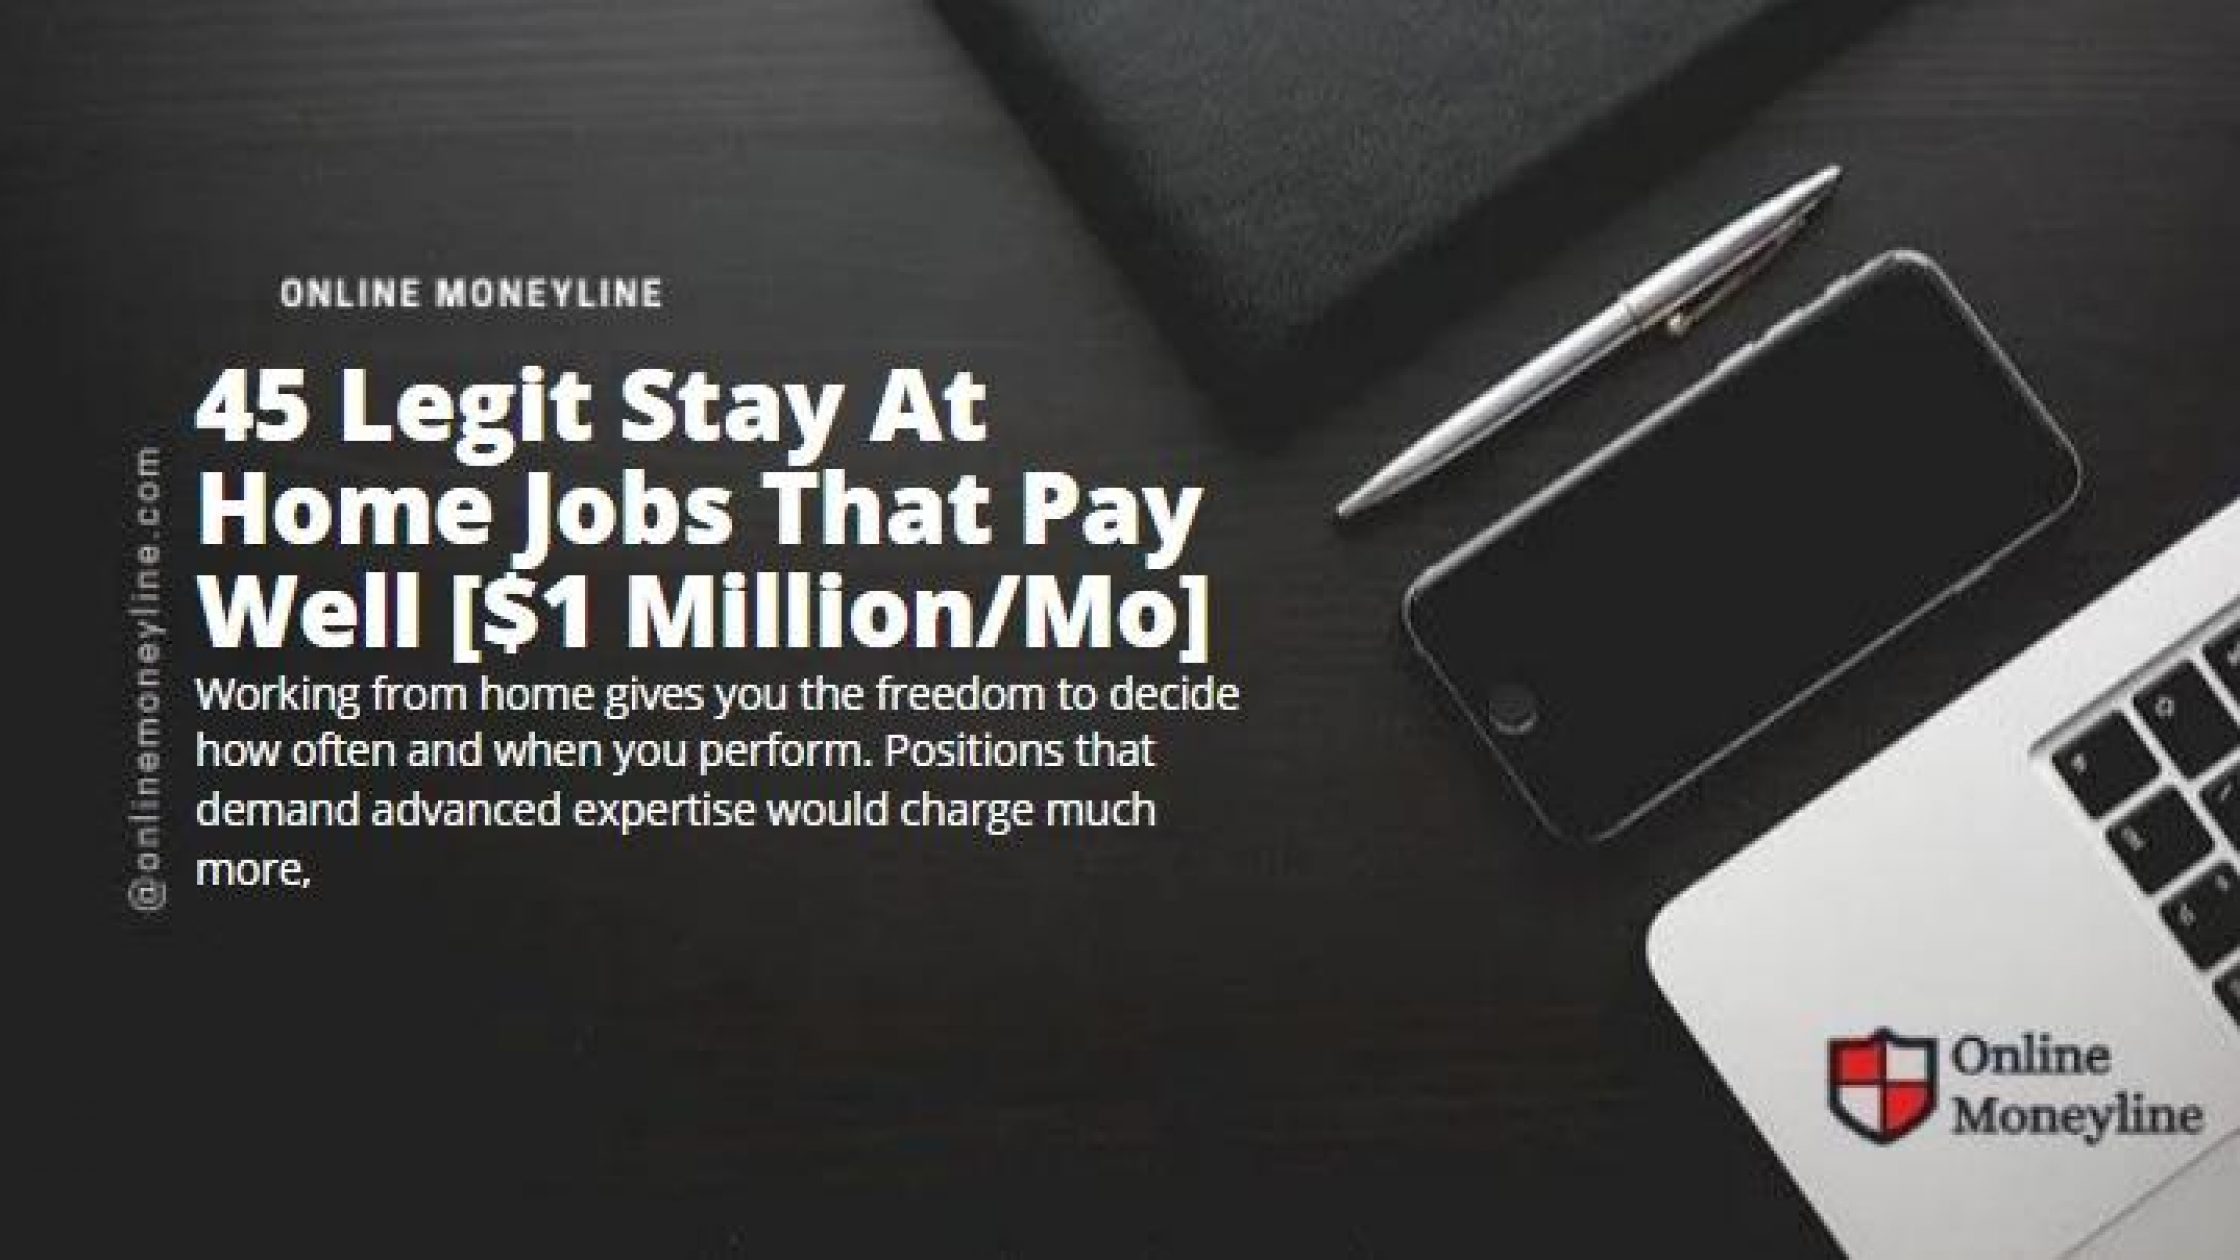 45 Legit Stay At Home Jobs That Pay Well [$1 Million/Mo]